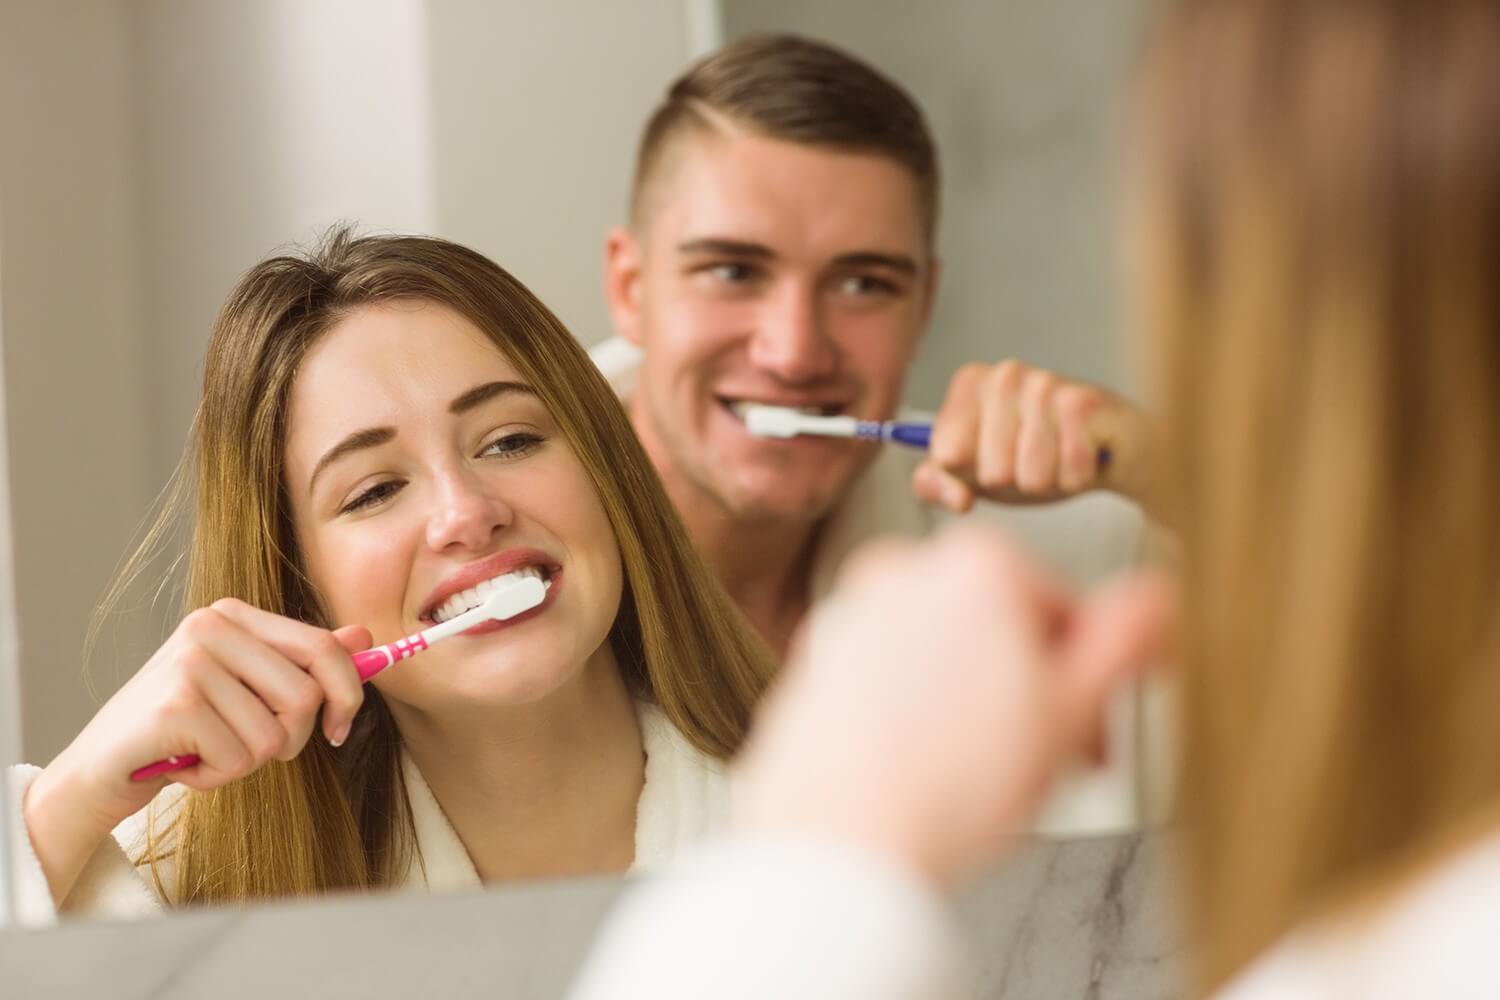 Oral Health Tips to Follow Before Going to Bed